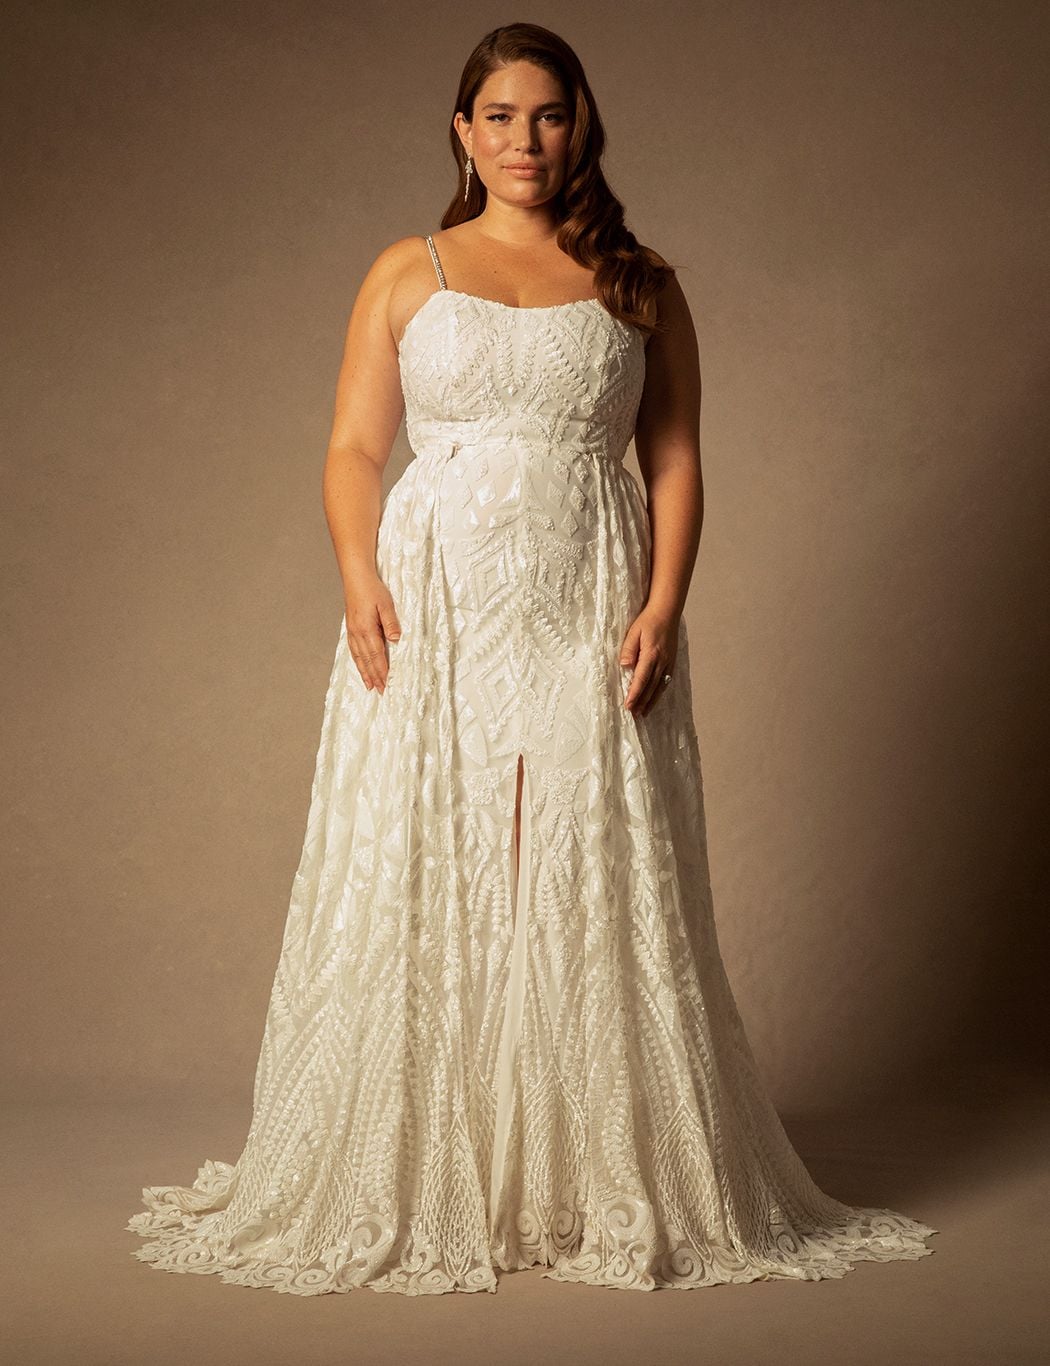 What Style of Bridal Gowns is Most Flattering for Plus-Size?